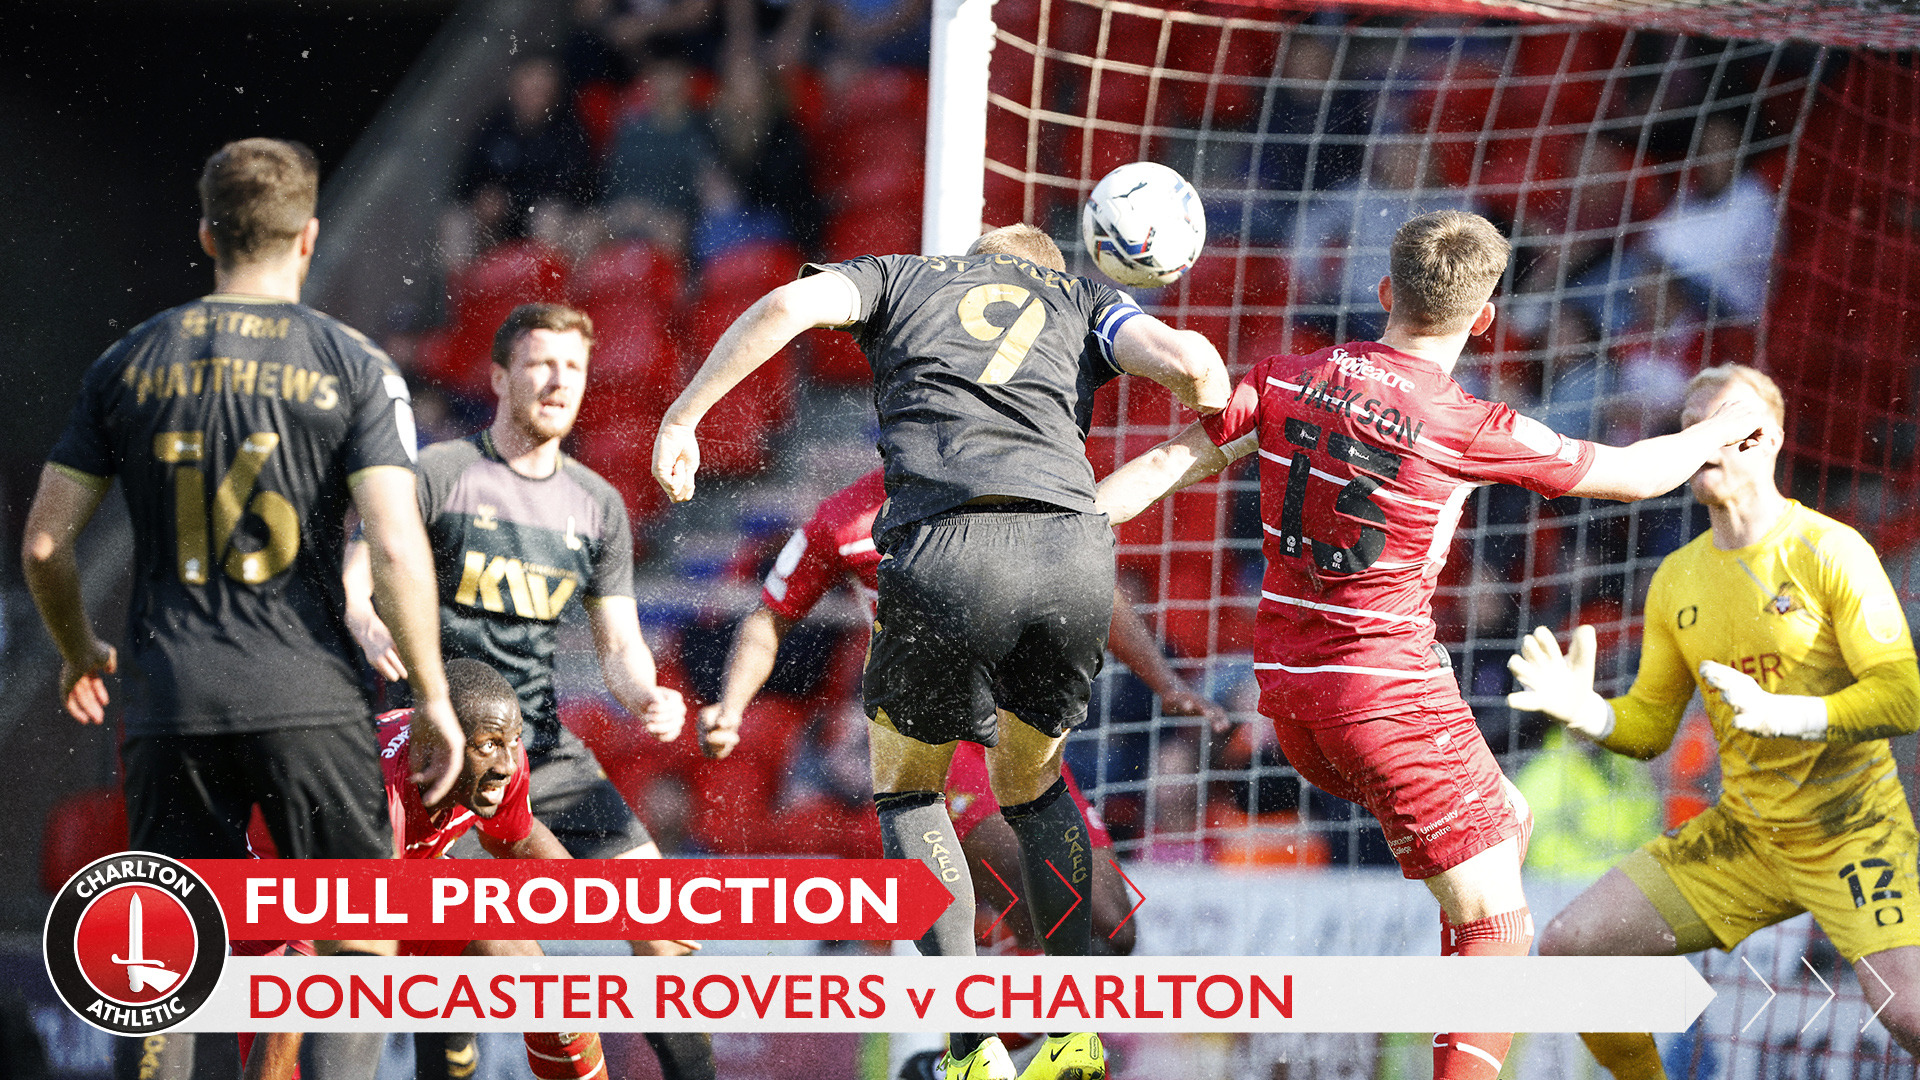 CharltonTV | Full broadcast - Doncaster Rovers (March 2022)